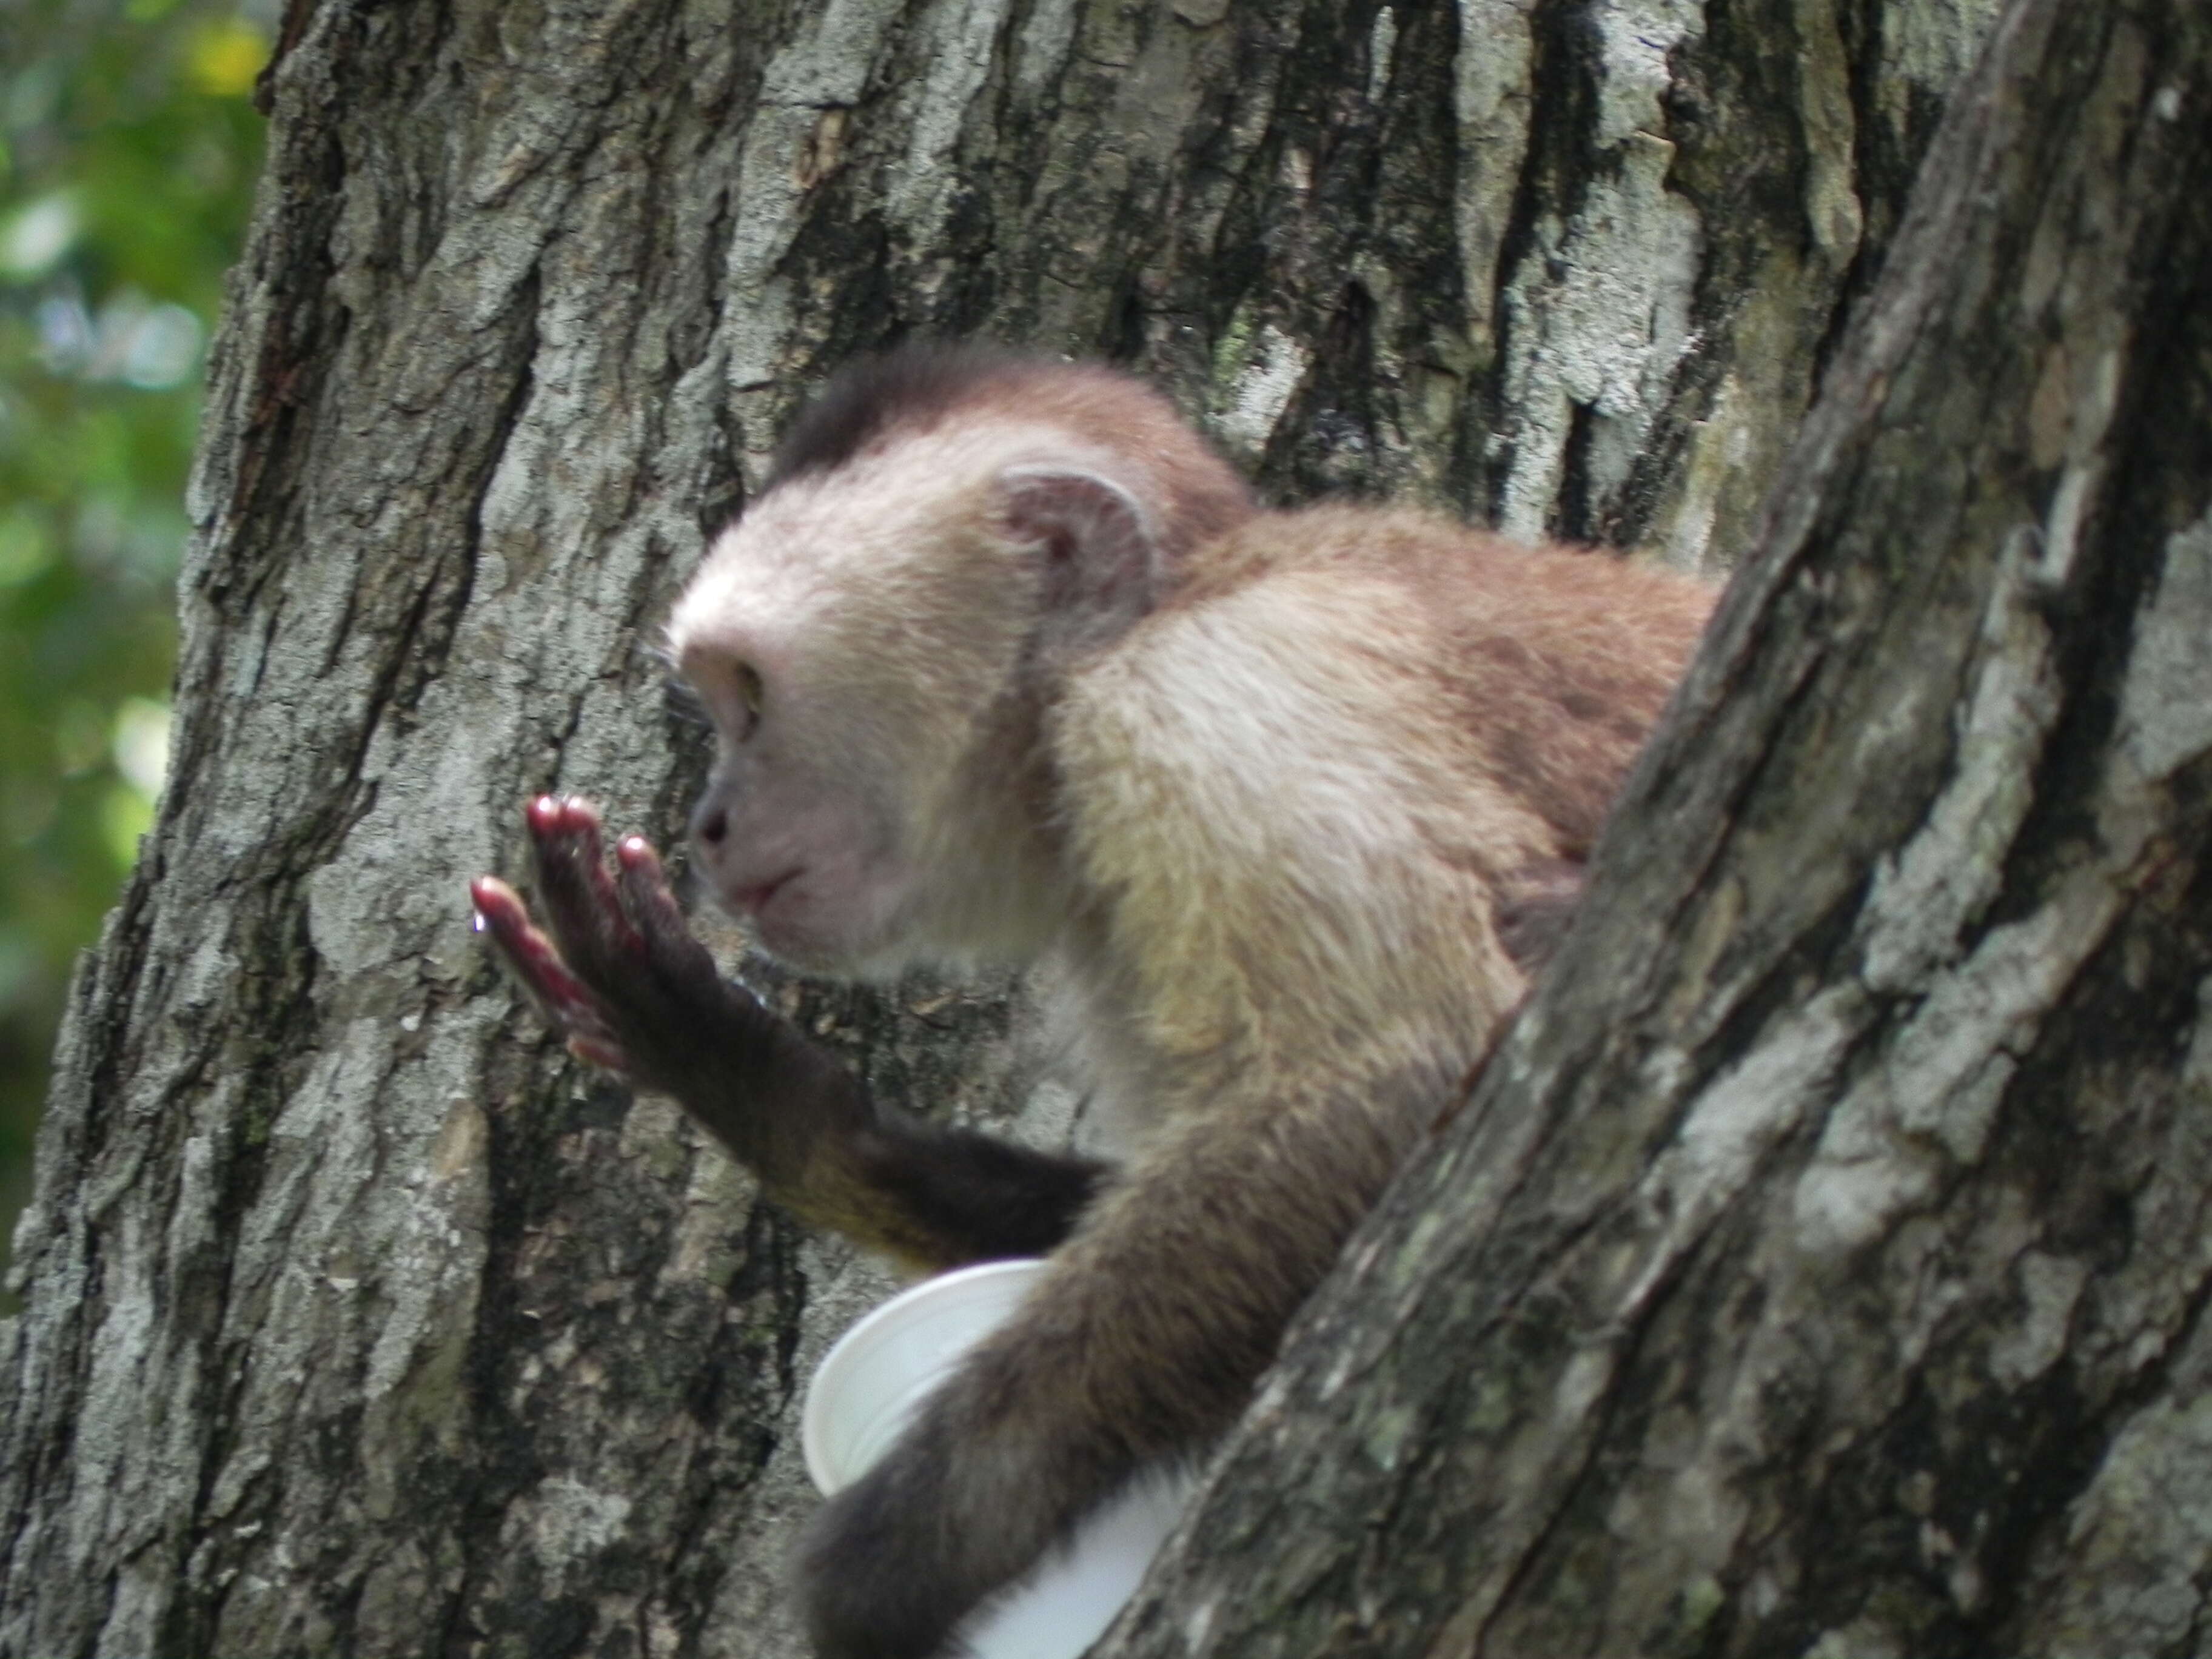 Image of Brown weeper capuchin